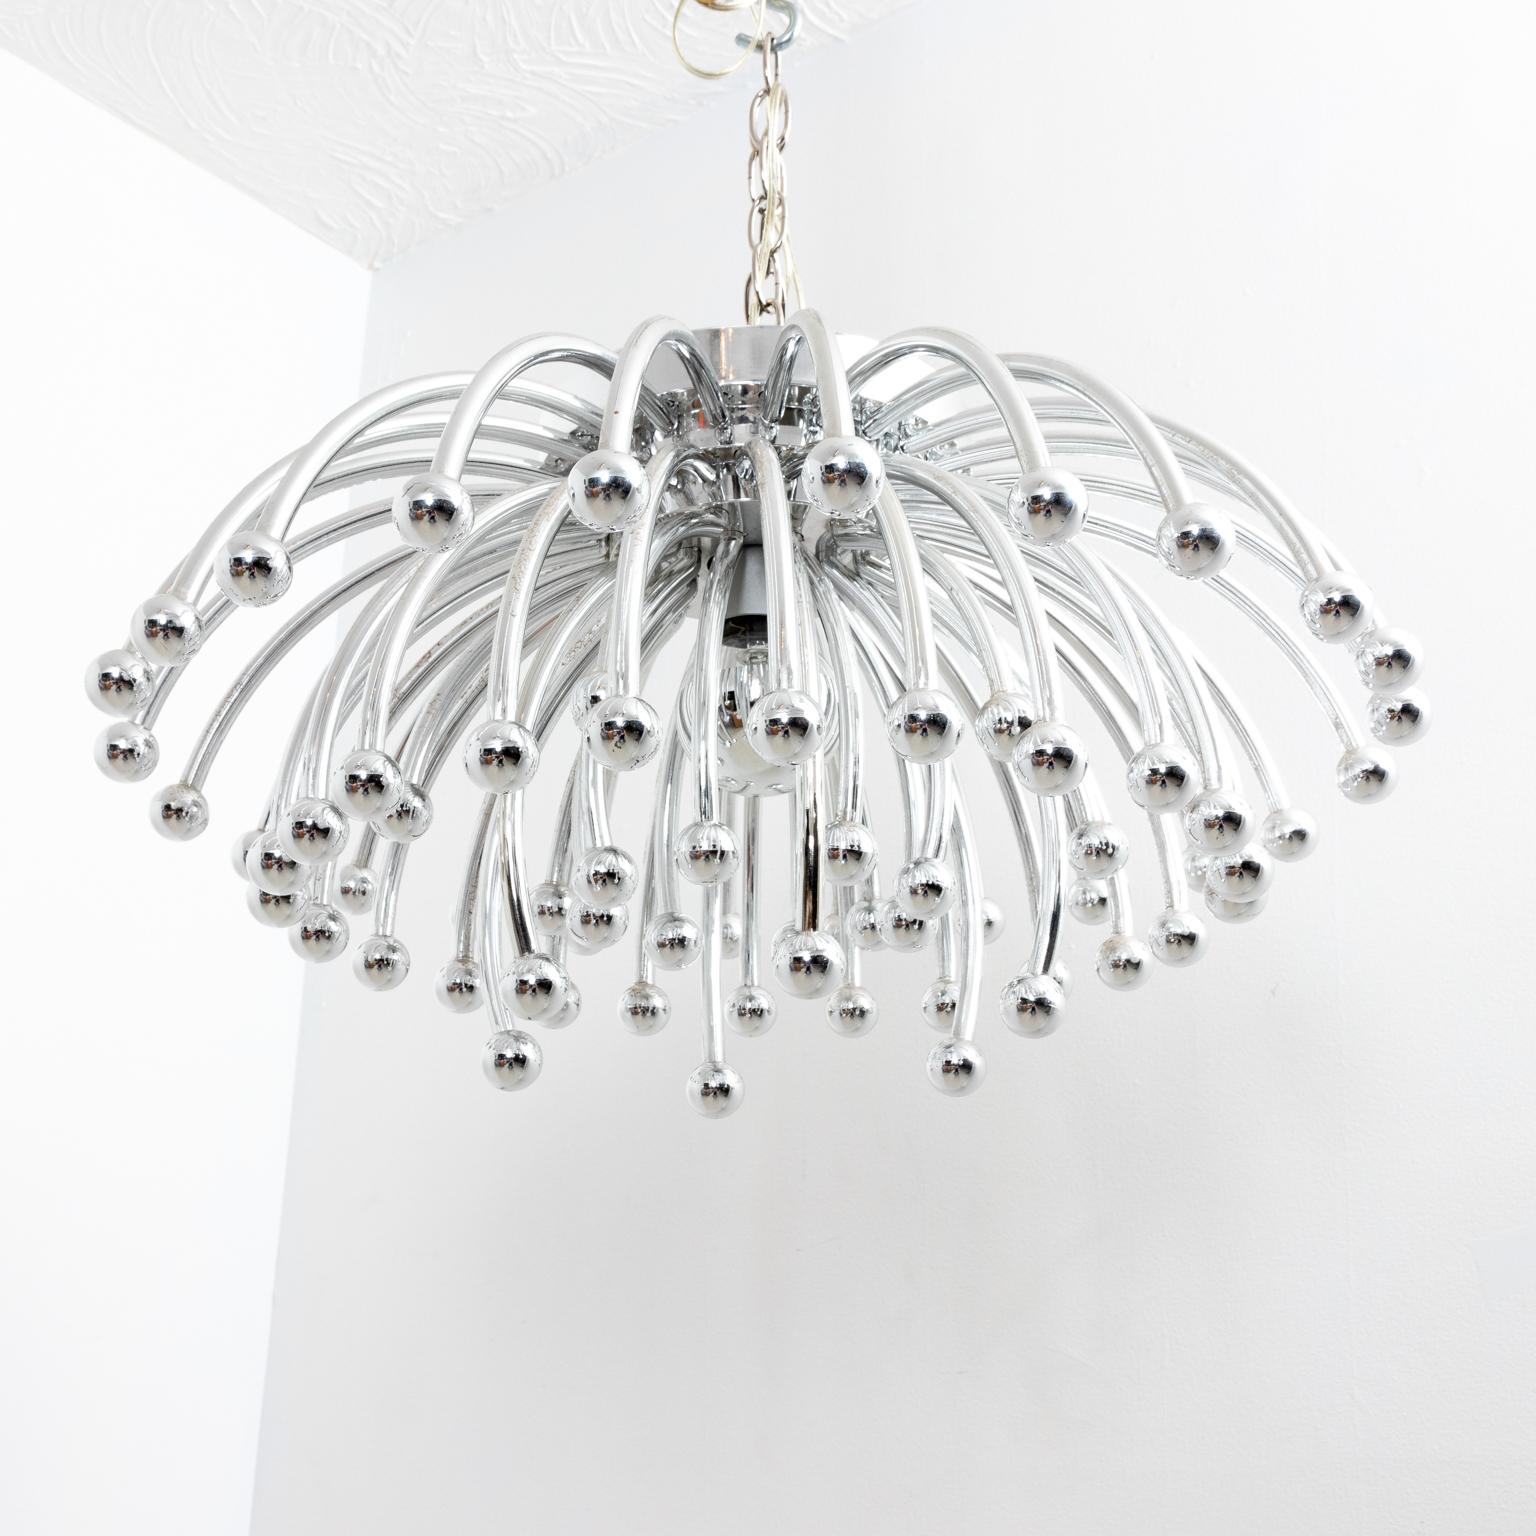 Circa 1970s Italian Studio Tetrarch Valenti Pastillo chandelier. The piece is composed of chromed ABS plastic. It can be used as a hanging chandelier, a flush mount chandelier, wall sconce, or table lamp. Rewired with new American socket and wiring.